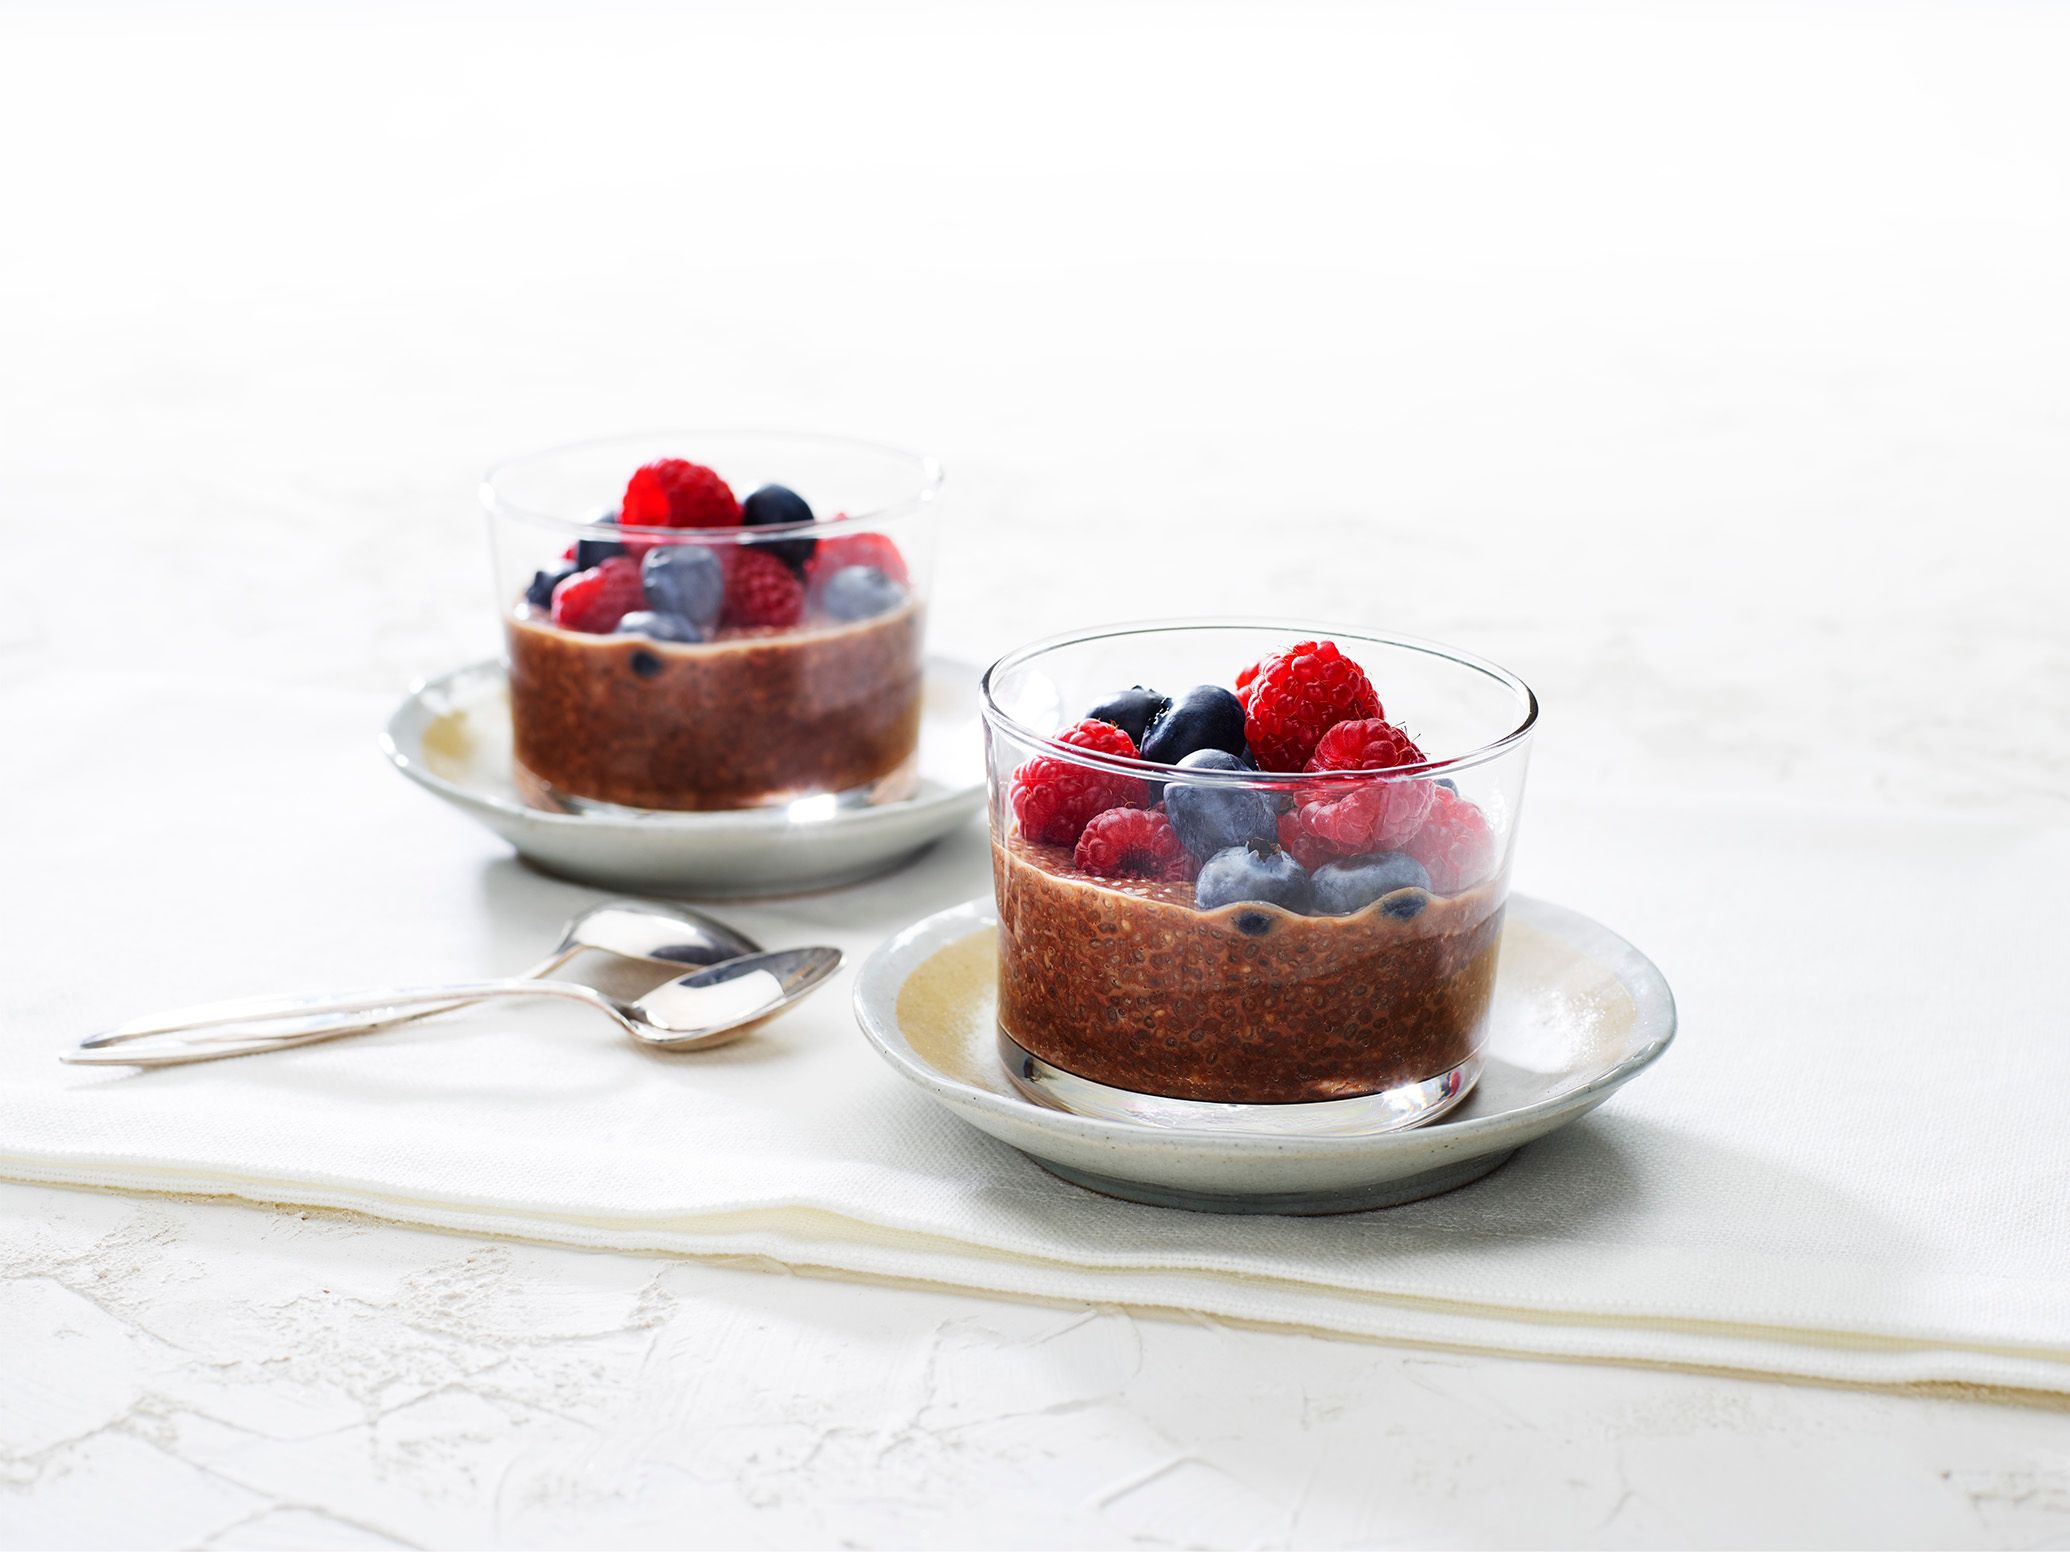 Two short glasses containing a chocolate coloured pudding topped with fresh blueberries and raspberries